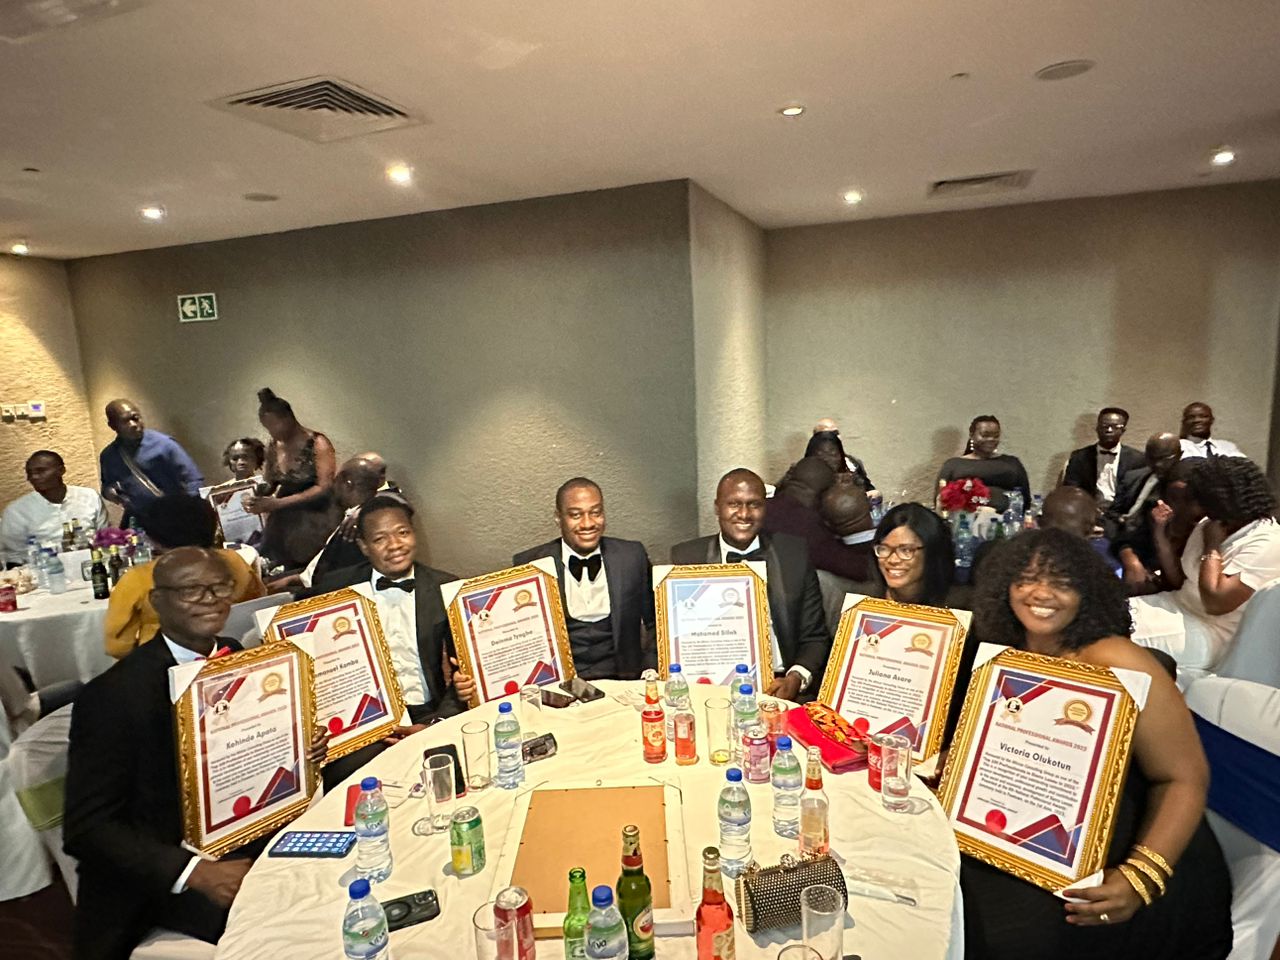 UBA-SL Senior Executives Receive the 2023 Sierra Ovation Awards for 100 Most Outstanding Professionals of the Year